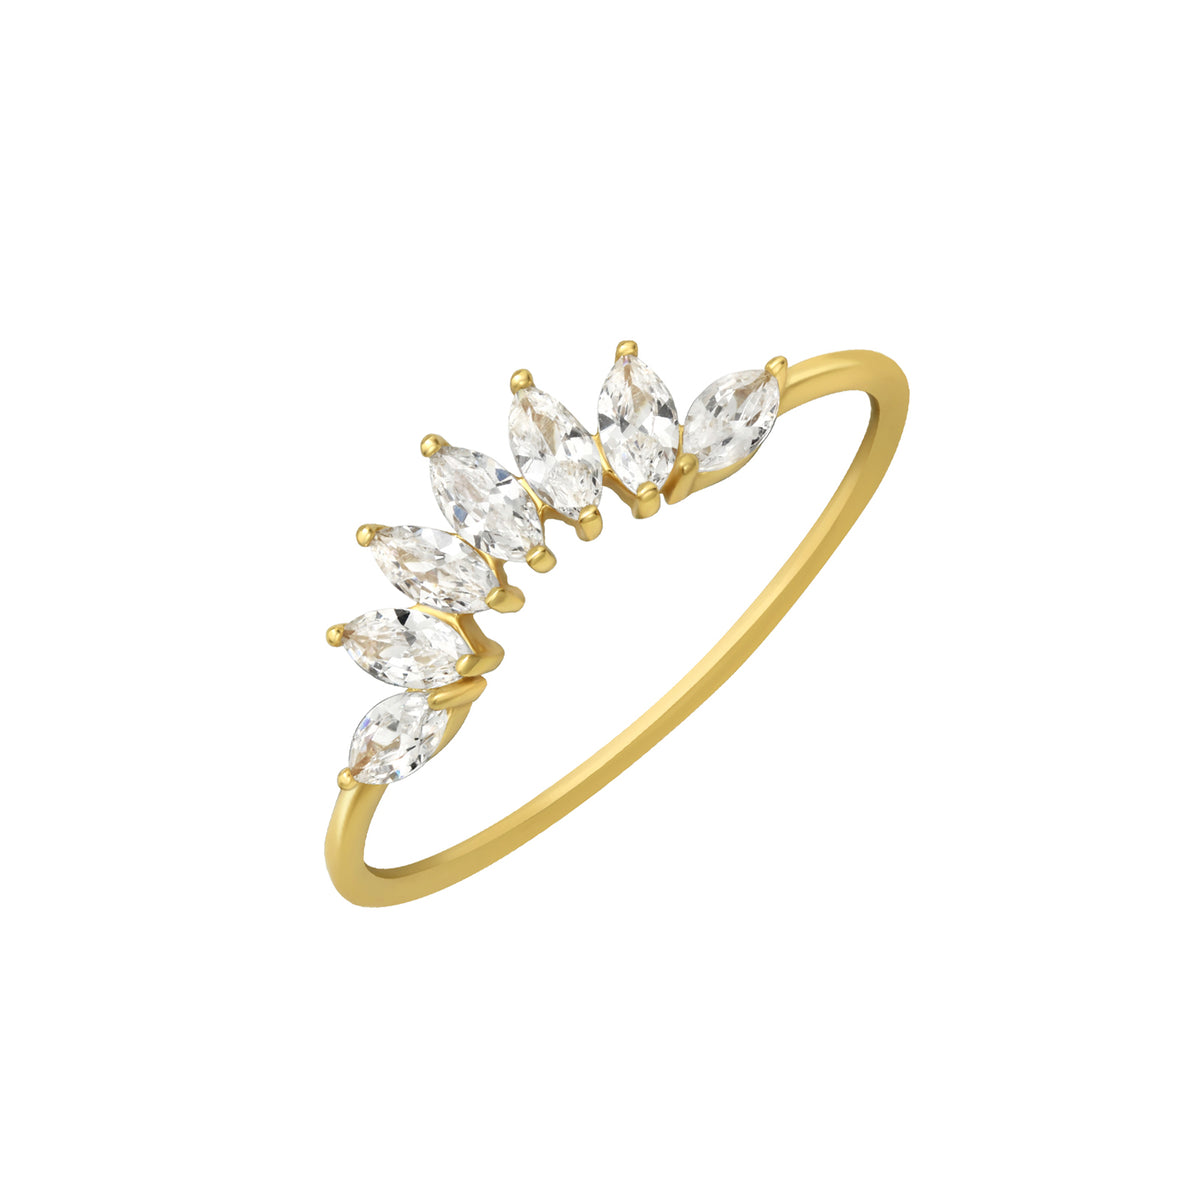 Lady Silver Ring, gold plated